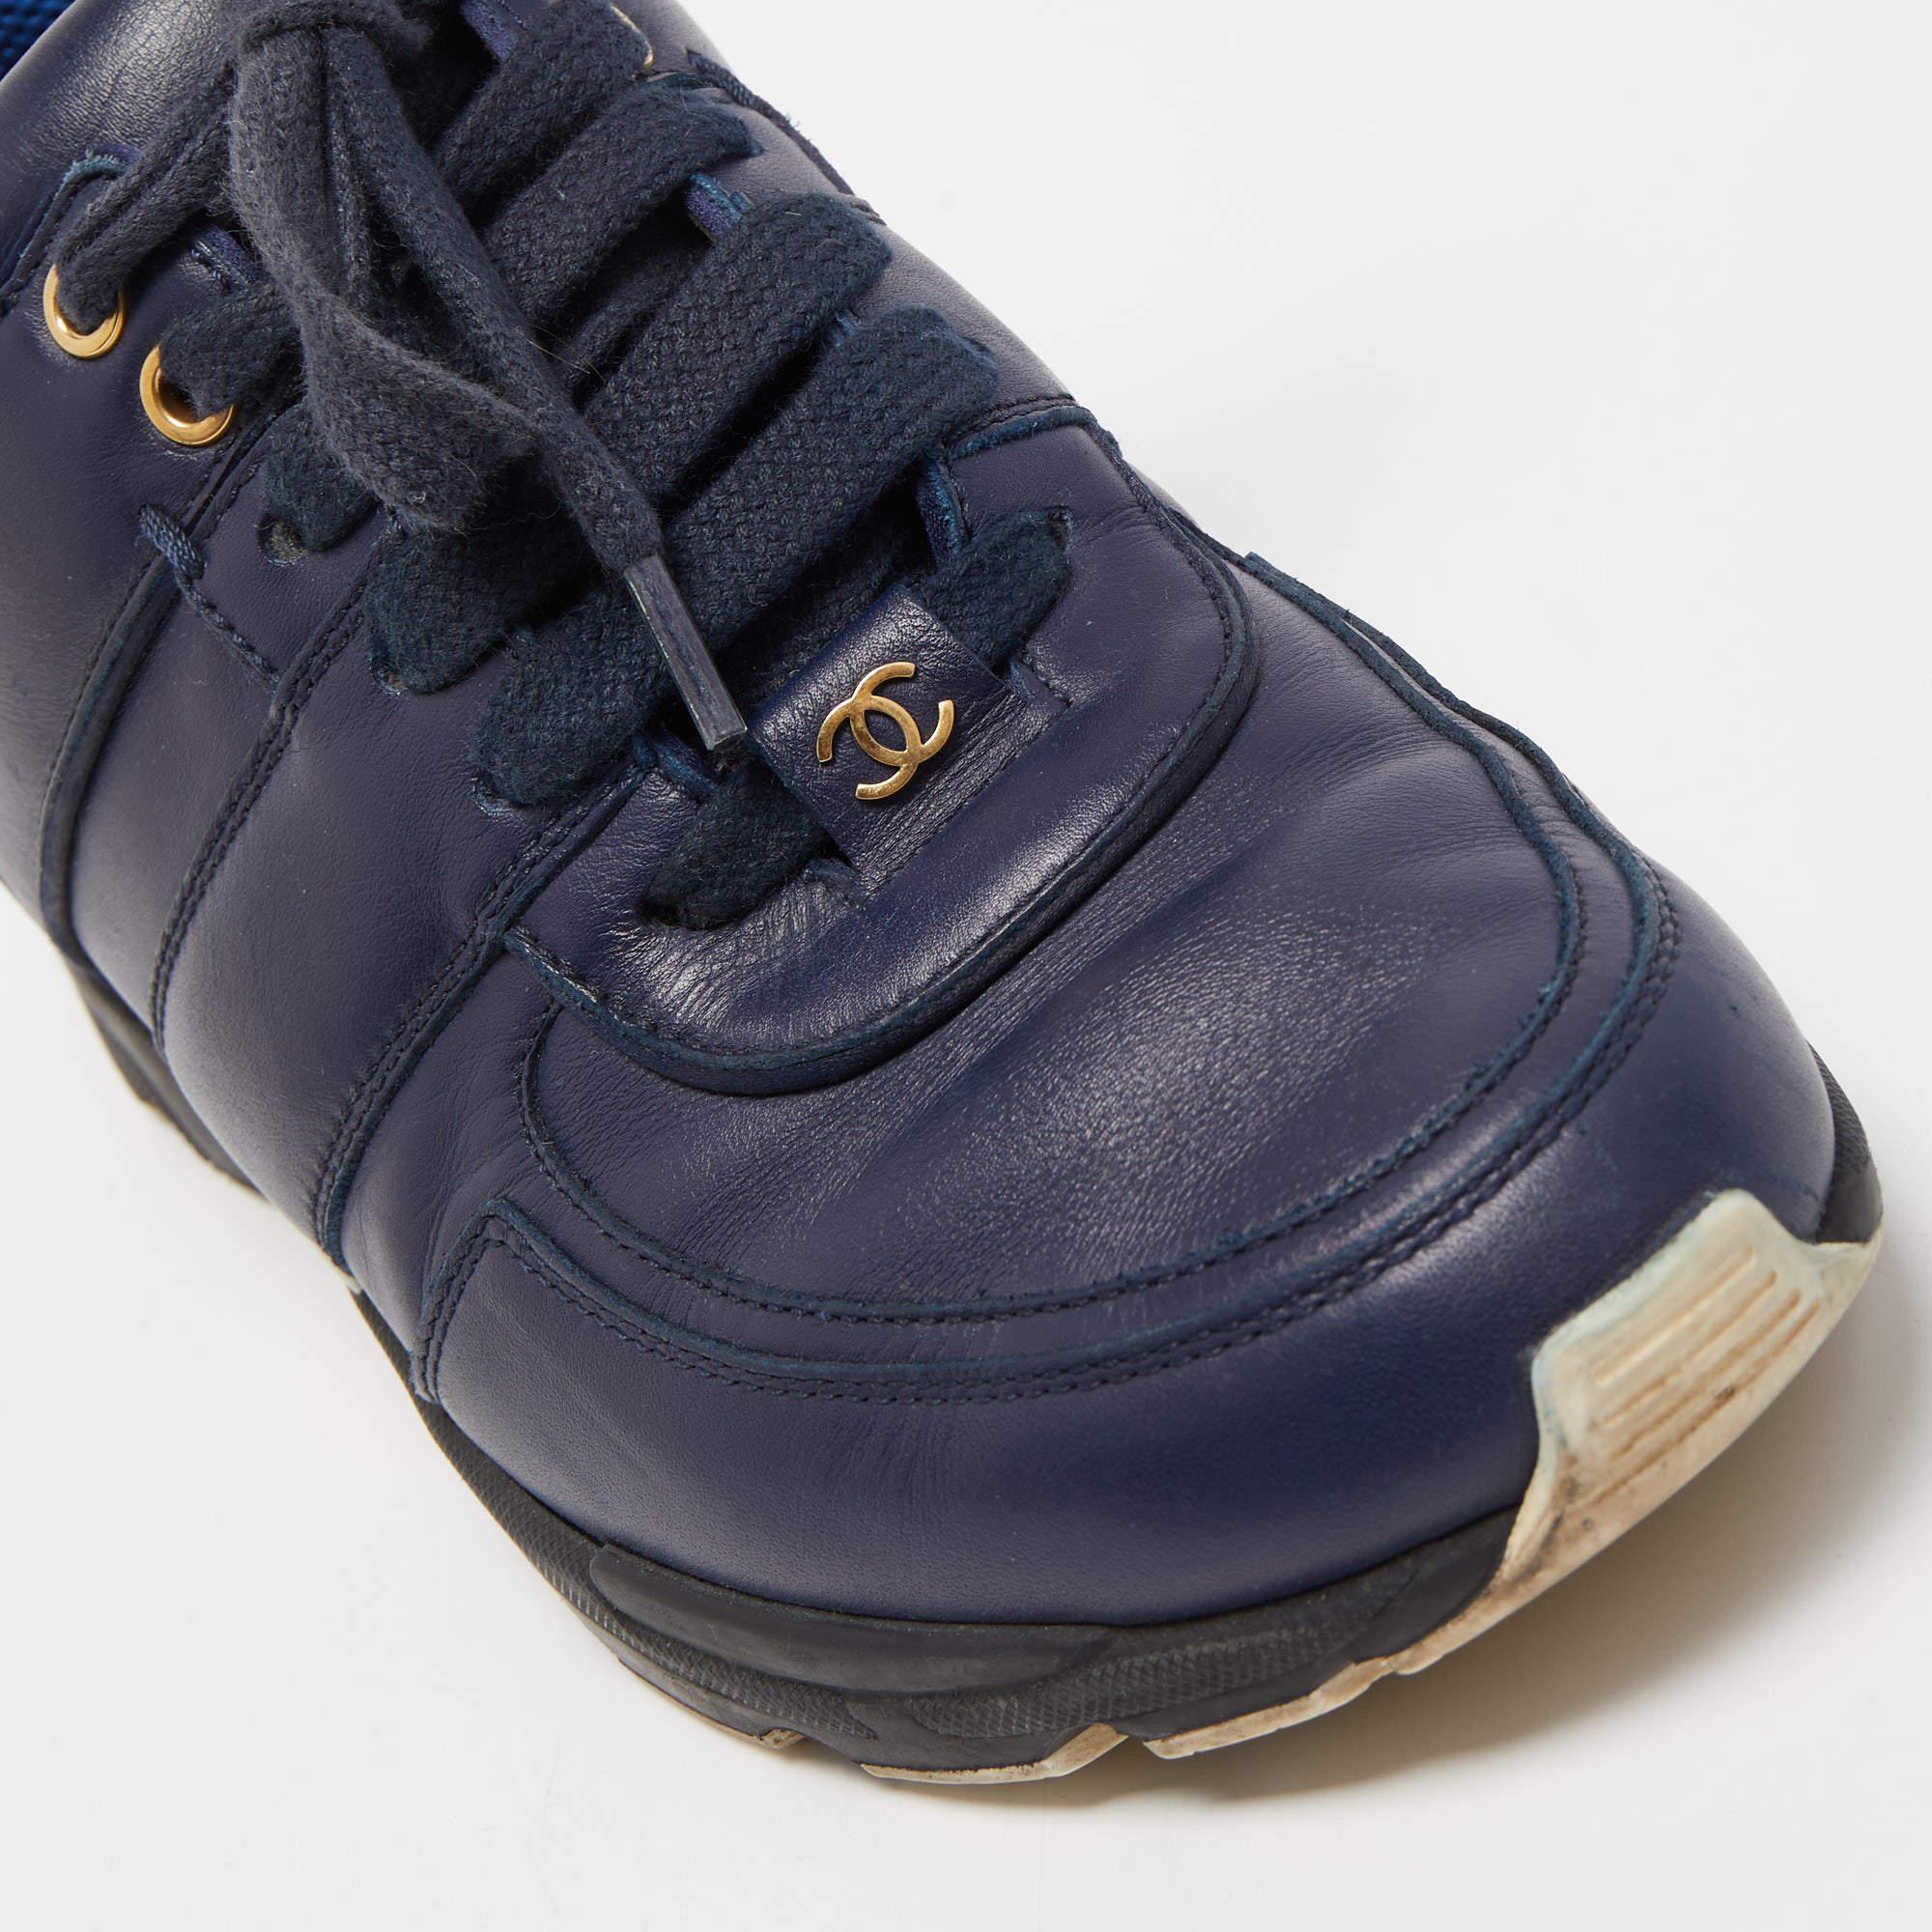 Chanel Navy Blue Satin And Leather CC Low Top Sneakers Size 37.5 3